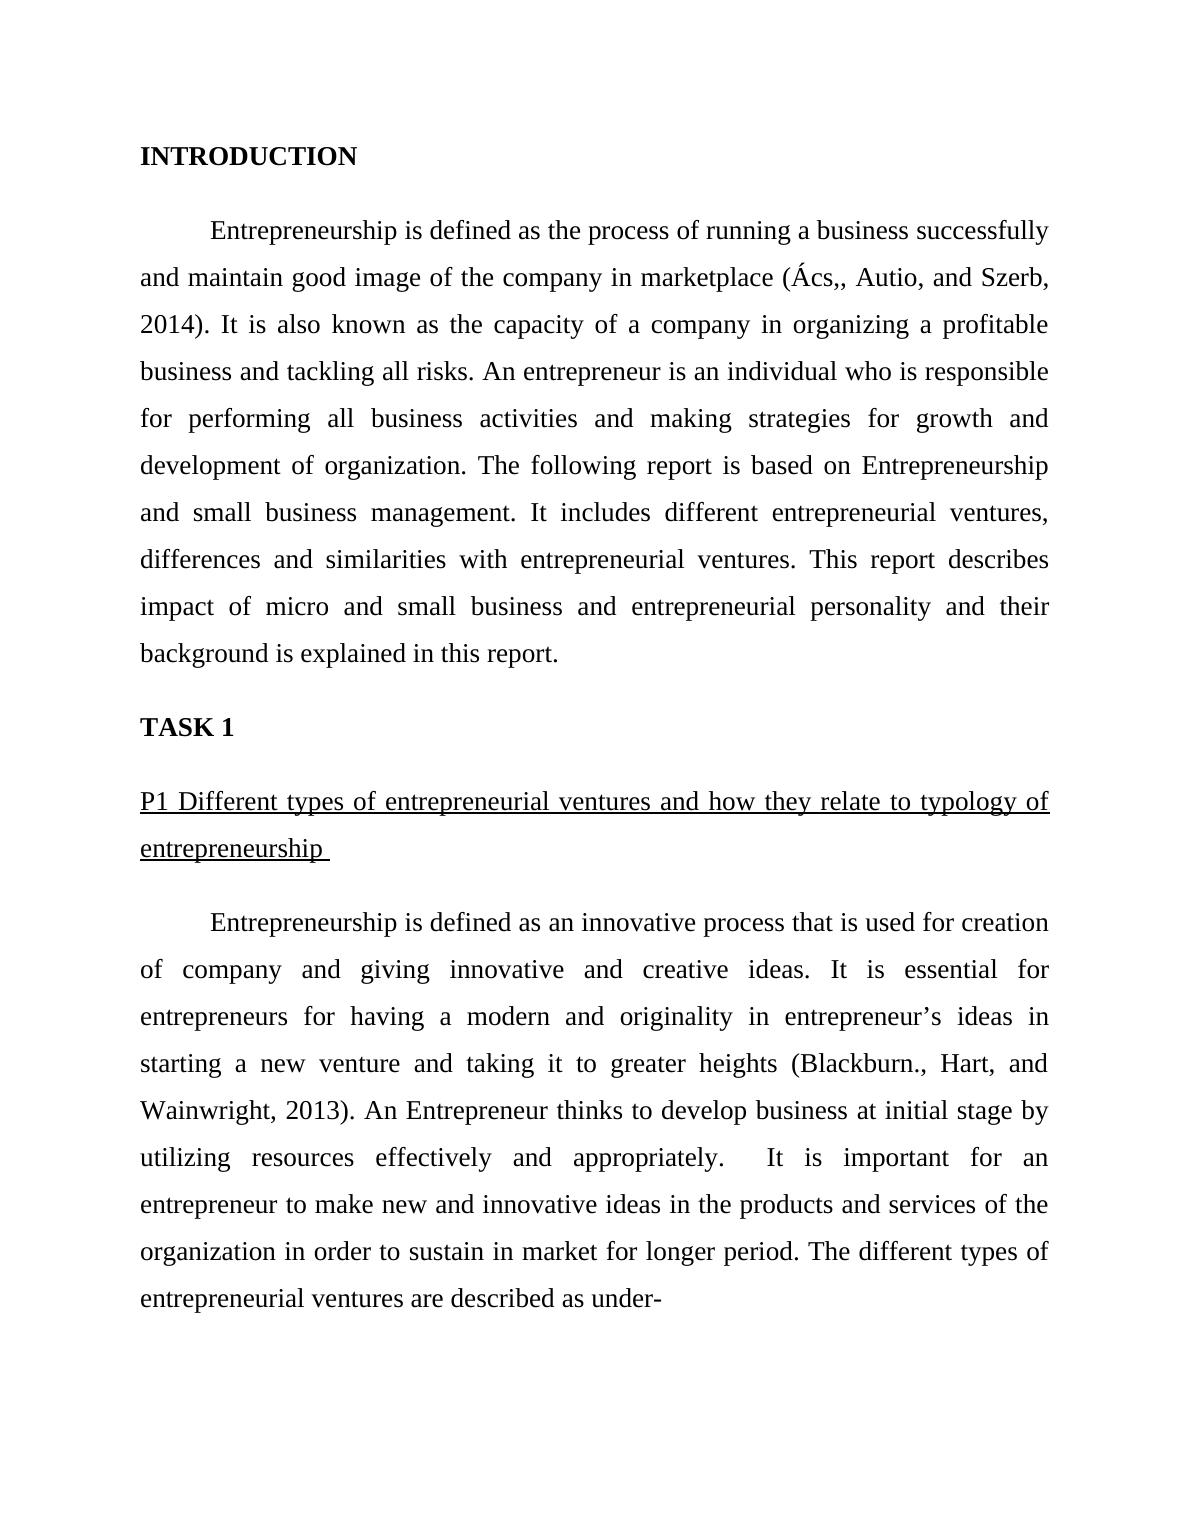 (PDF) Entrepreneurship and Small Business Management Project | Assignment_3